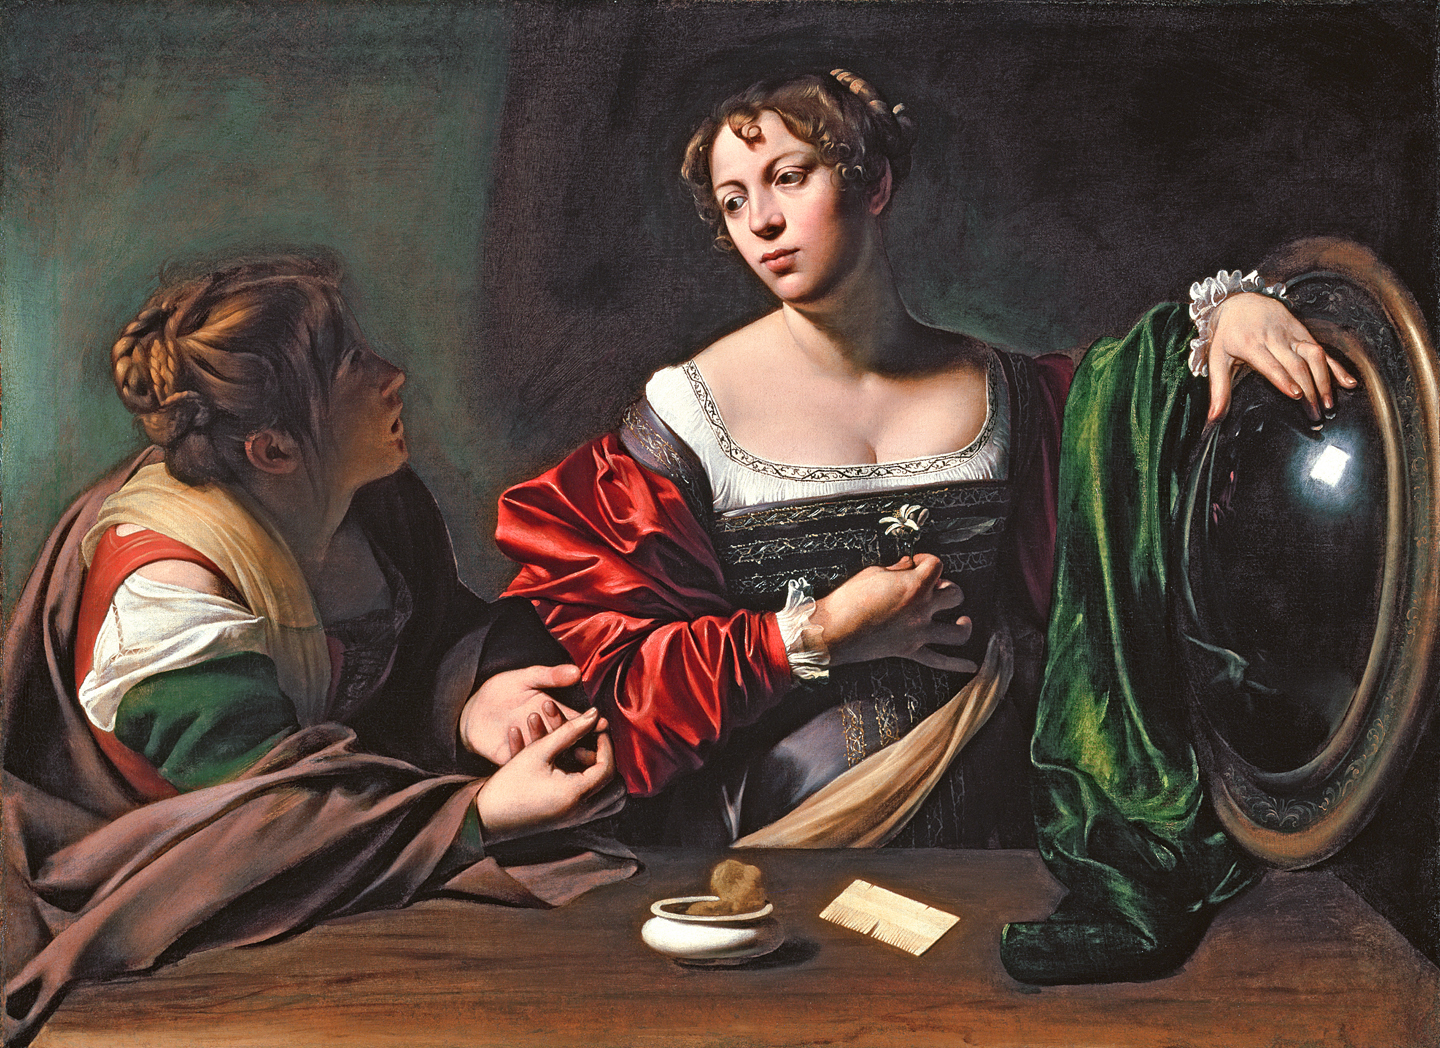 https://uploads4.wikiart.org/00129/images/caravaggio/martha-and-mary-magdalene.jpg